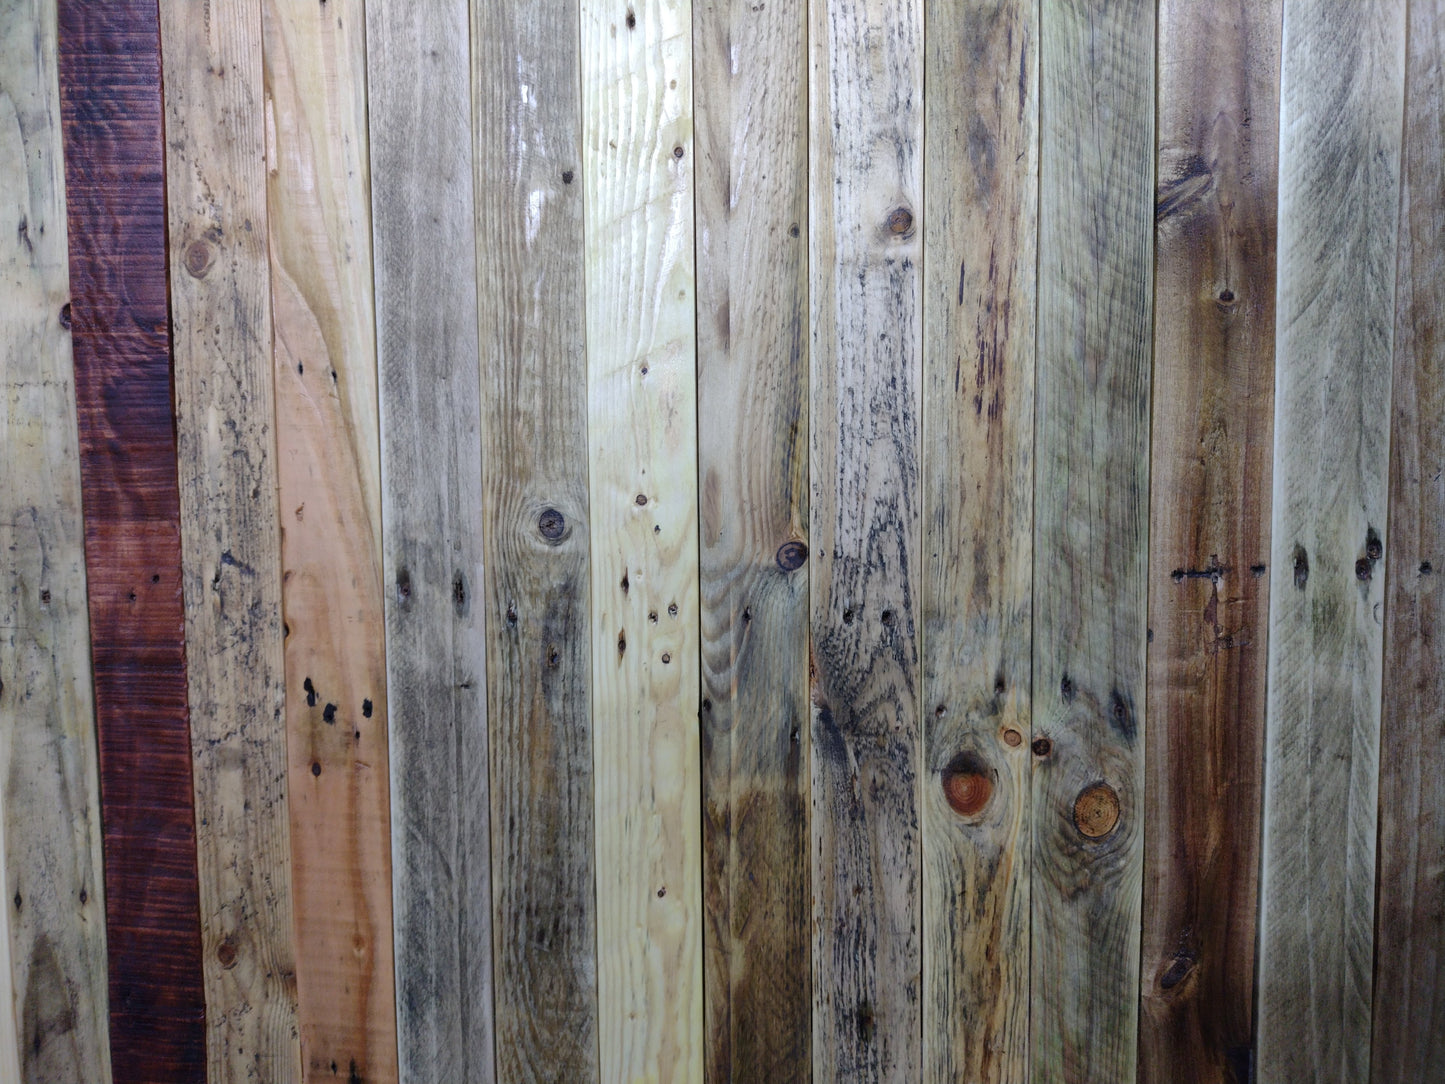 Rustic Reclaimed Wood Cladding - 1 sqm - Authentic Wood Grain - Oiled Finish 4-8 mm Thickness